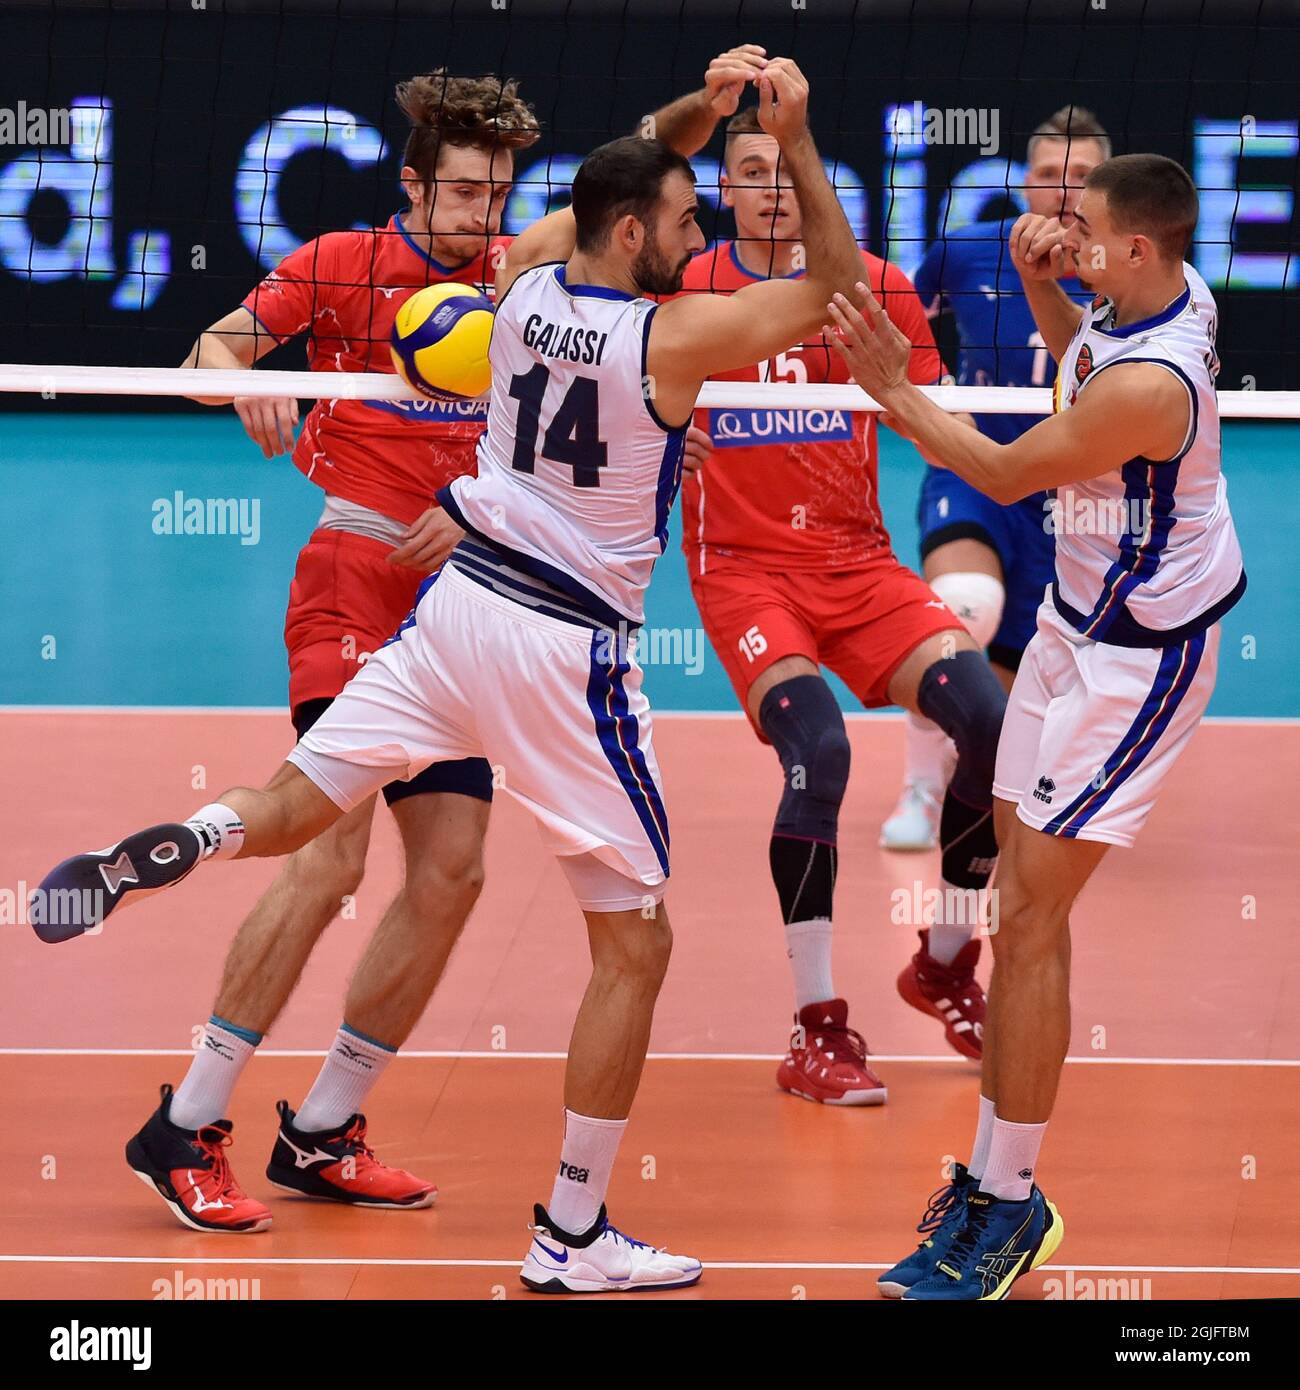 Ostrava, Czech Republic. 09th Sep, 2021. (L-R) Oliver Sedlacek of Czech  Republic, Gianluca Galassi of Italy, Lukas Vasina and Milan Monik of Czech  Republic and Simone Giannelli of Italy in action during